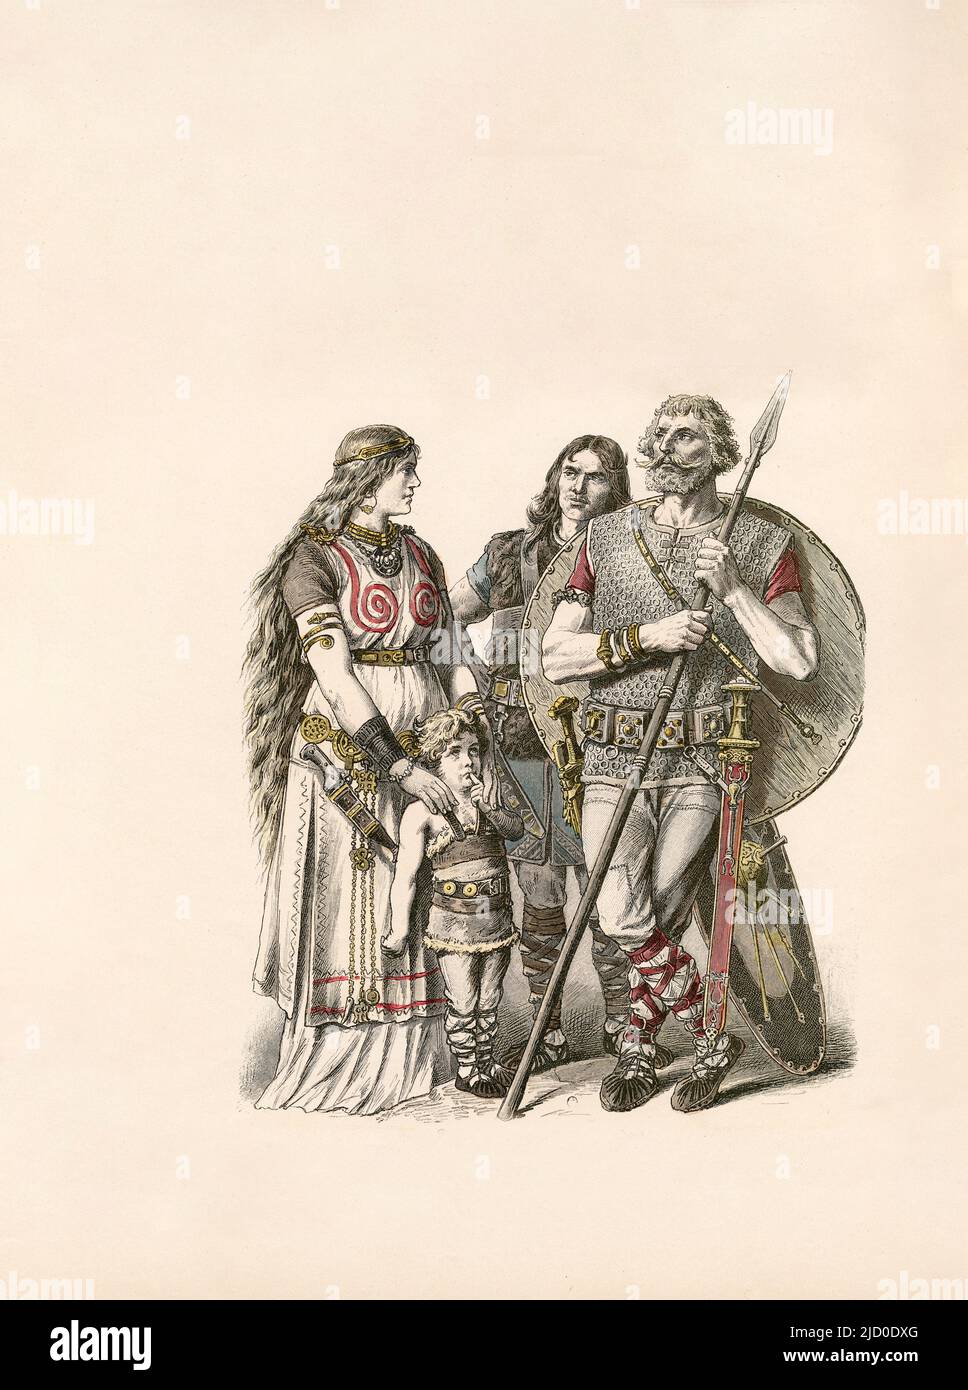 Ancient Germans, The Teutonic Tribes, Third and Fourth Centuries AD, Illustration, The History of Costume, Braun & Schneider, Munich, Germany, 1861-1880 Stock Photo